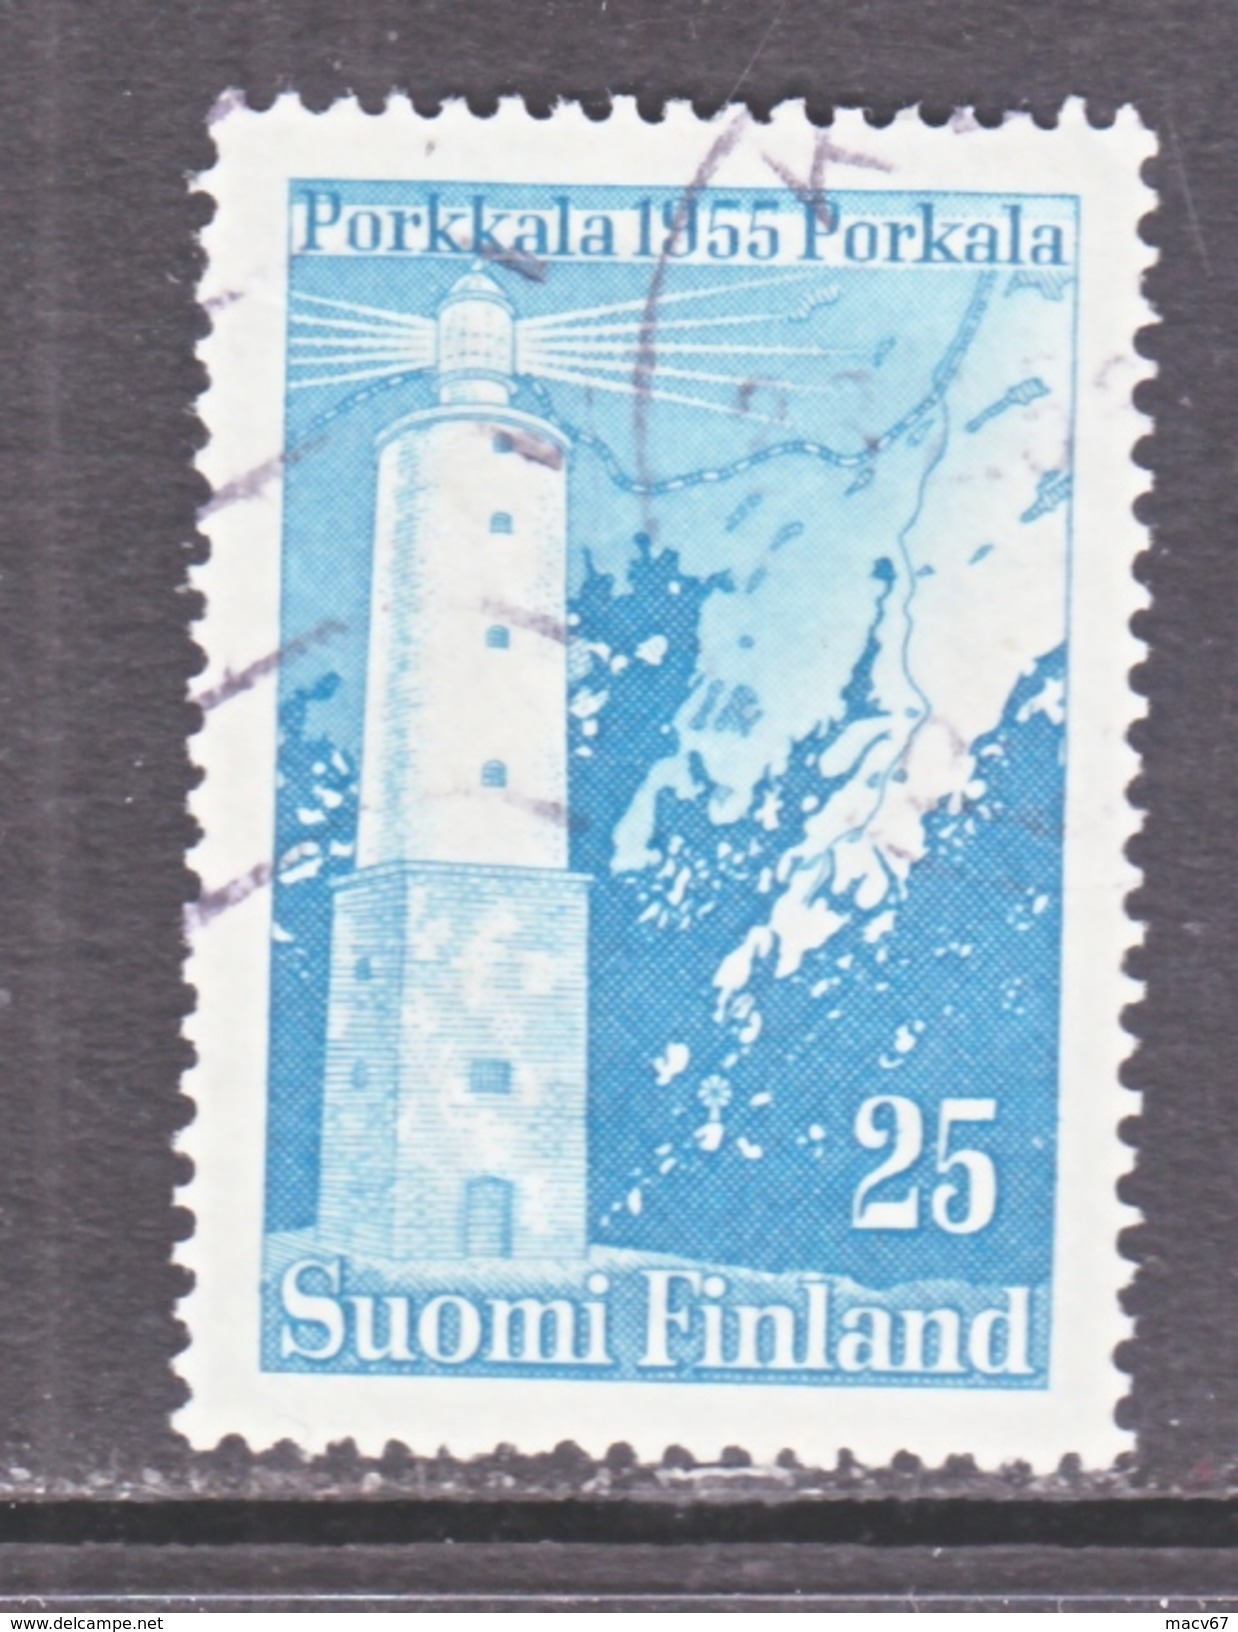 FINLAND  335   (o)   LIGHTHOUSE - Used Stamps